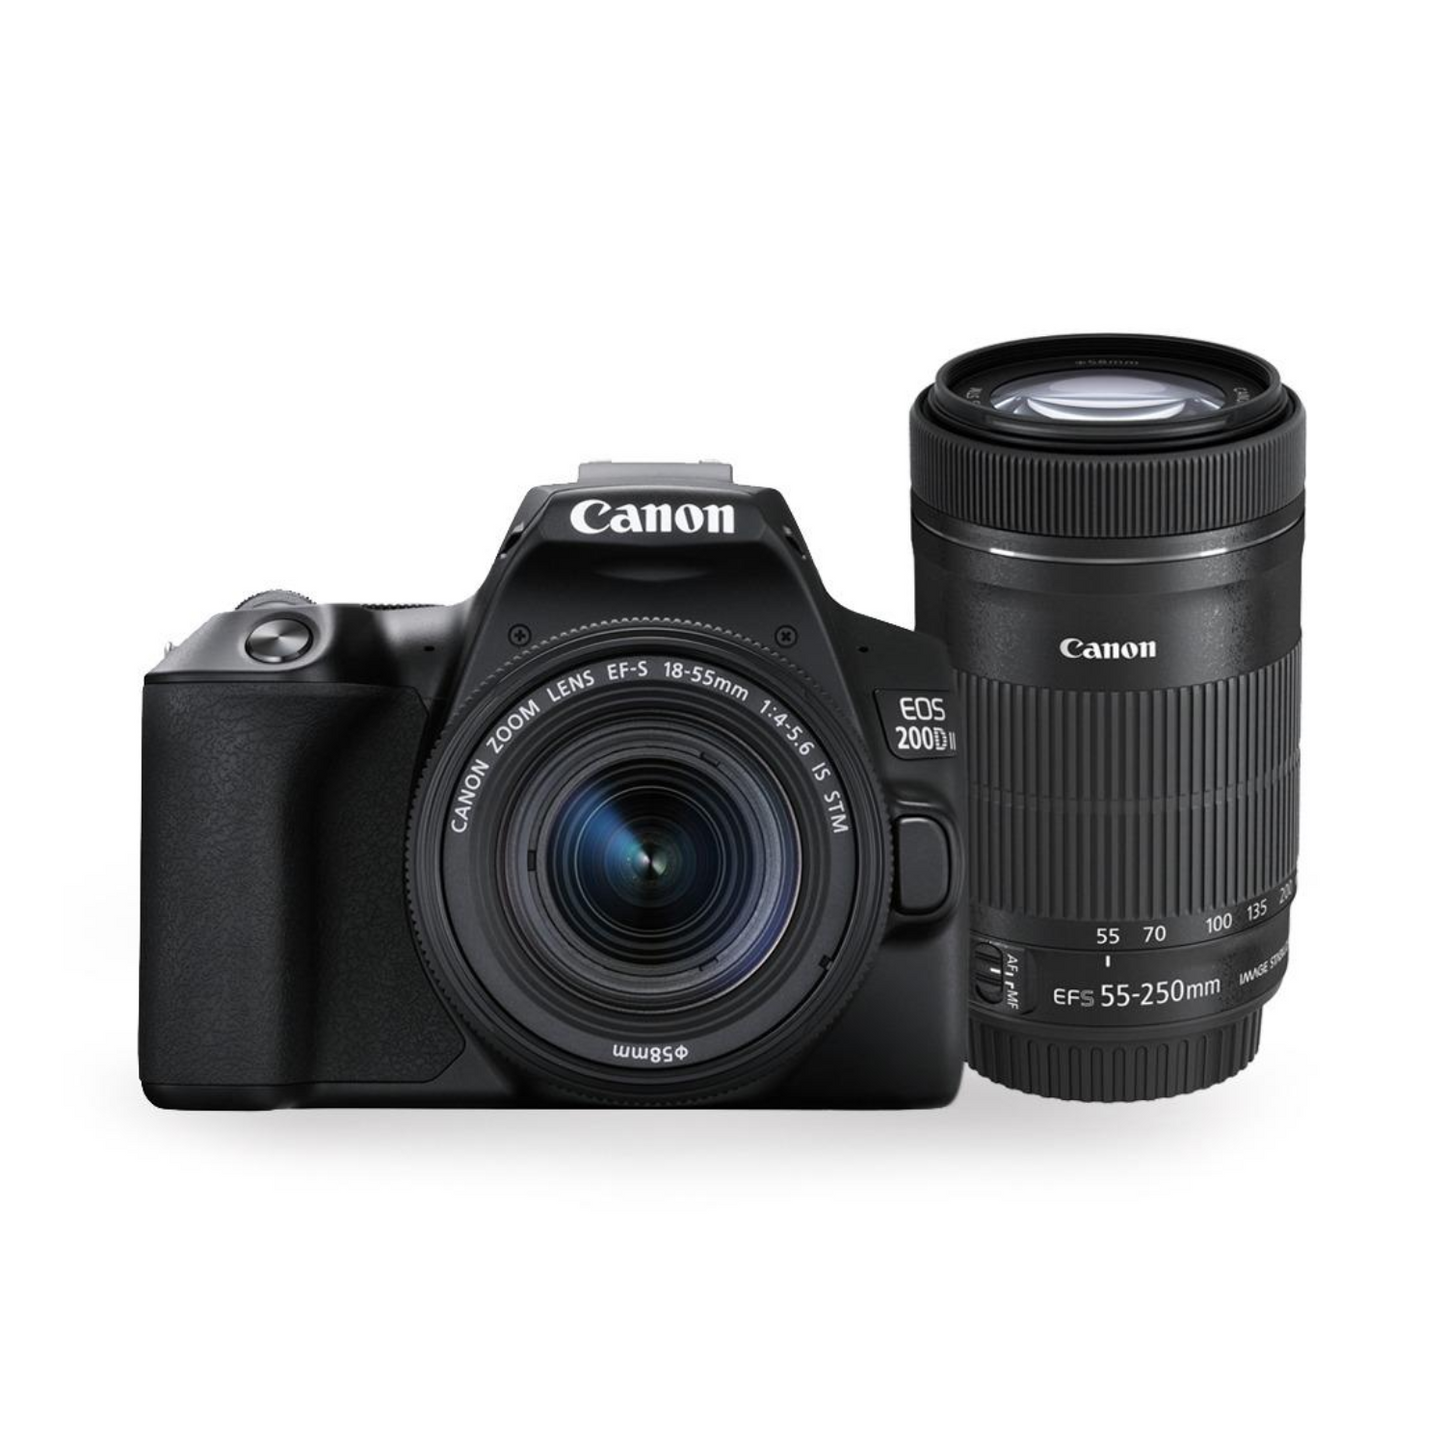 Canon EOS 200D II DSLR Camera with 18-55mm Lens Kit, Black